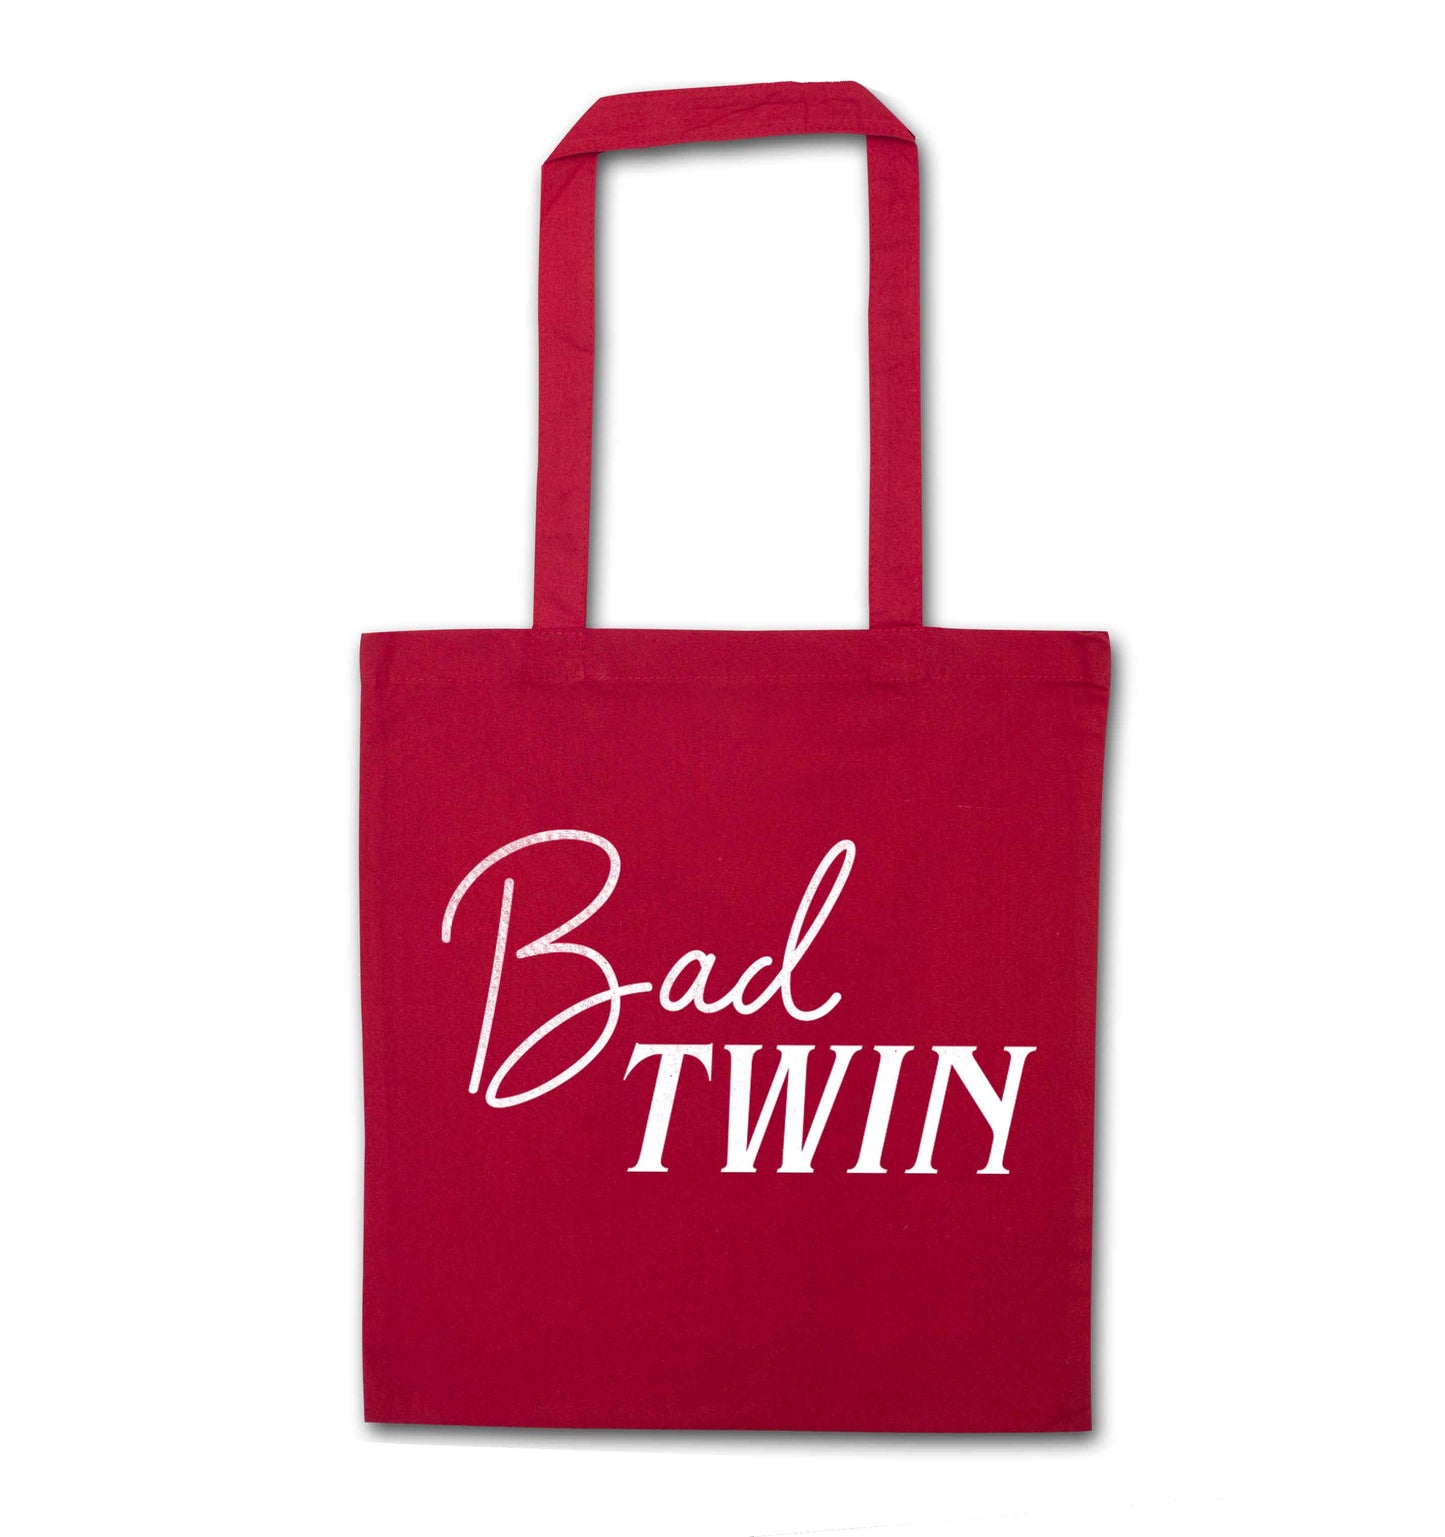 Bad twin red tote bag